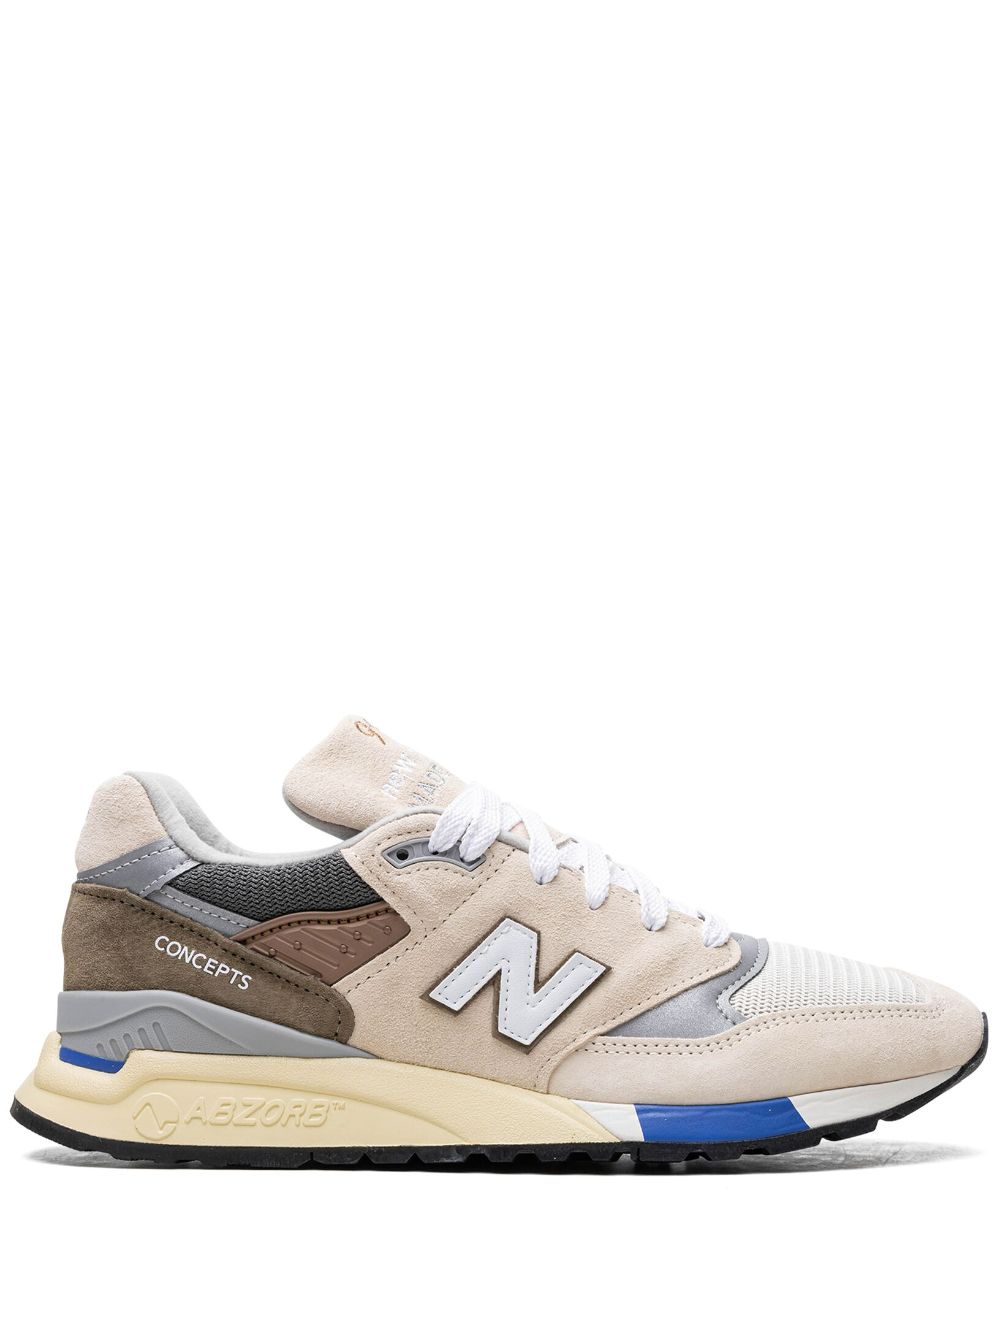 New Balance X Concepts 998 "c-note" Sneakers In Neutrals